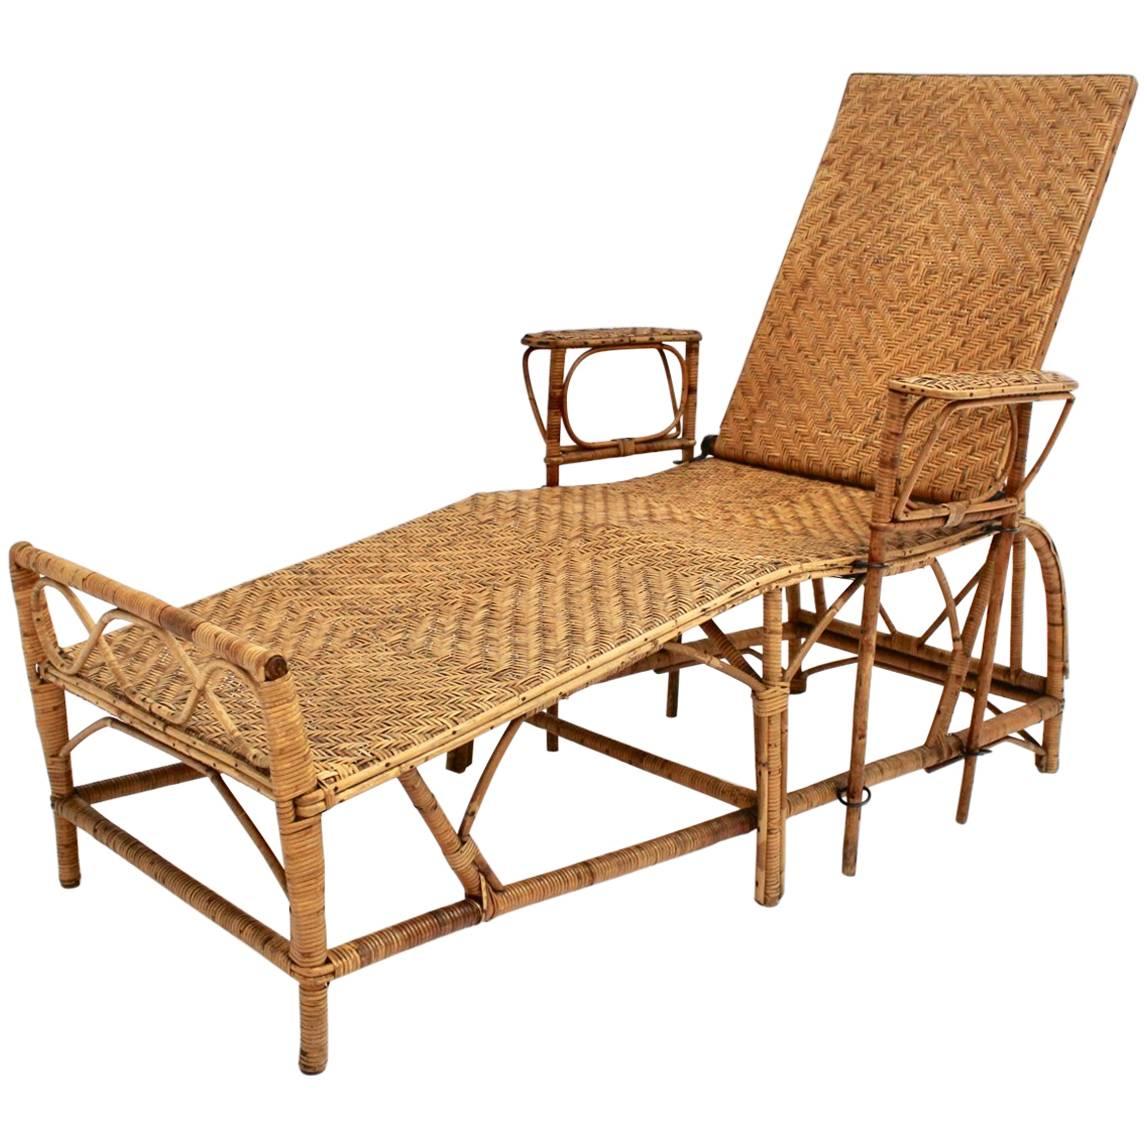 Rattan Art Deco Vintage Chaise Longue by Perret & Vibert Attributed France 1920s